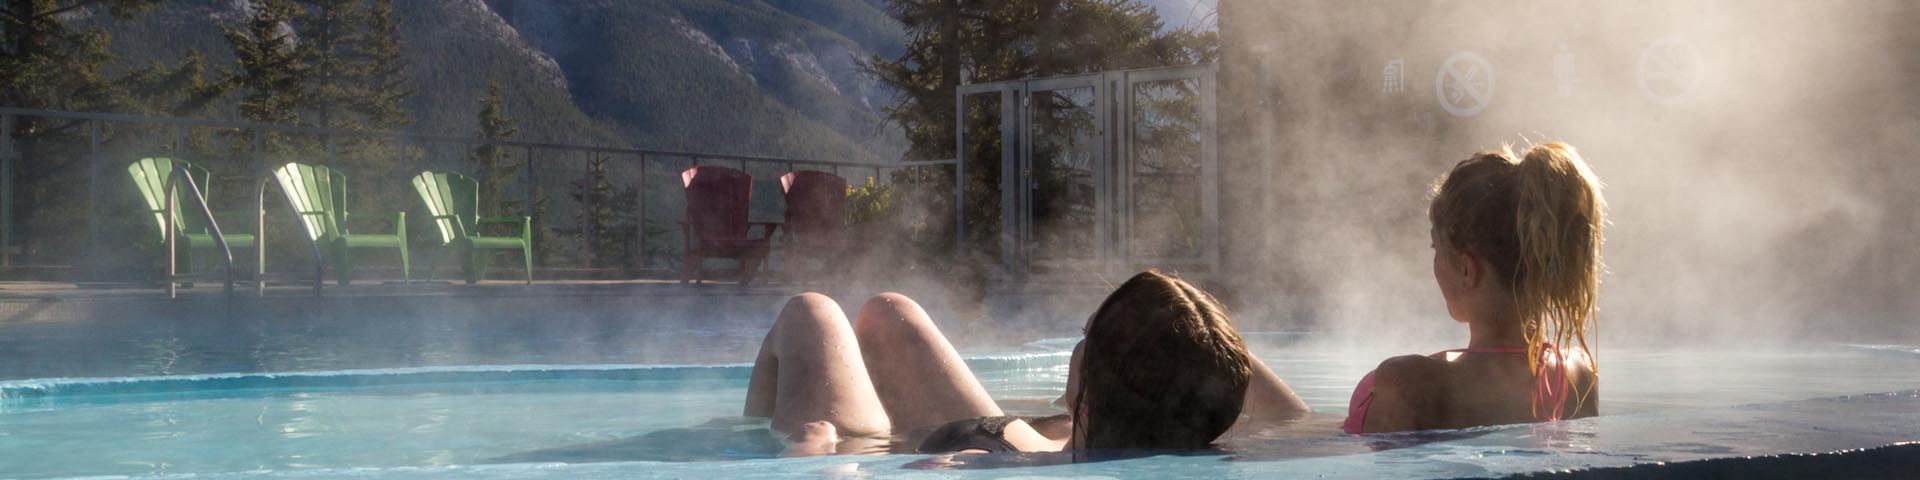 Two young women relaxing in the Banff Upper hot Springs